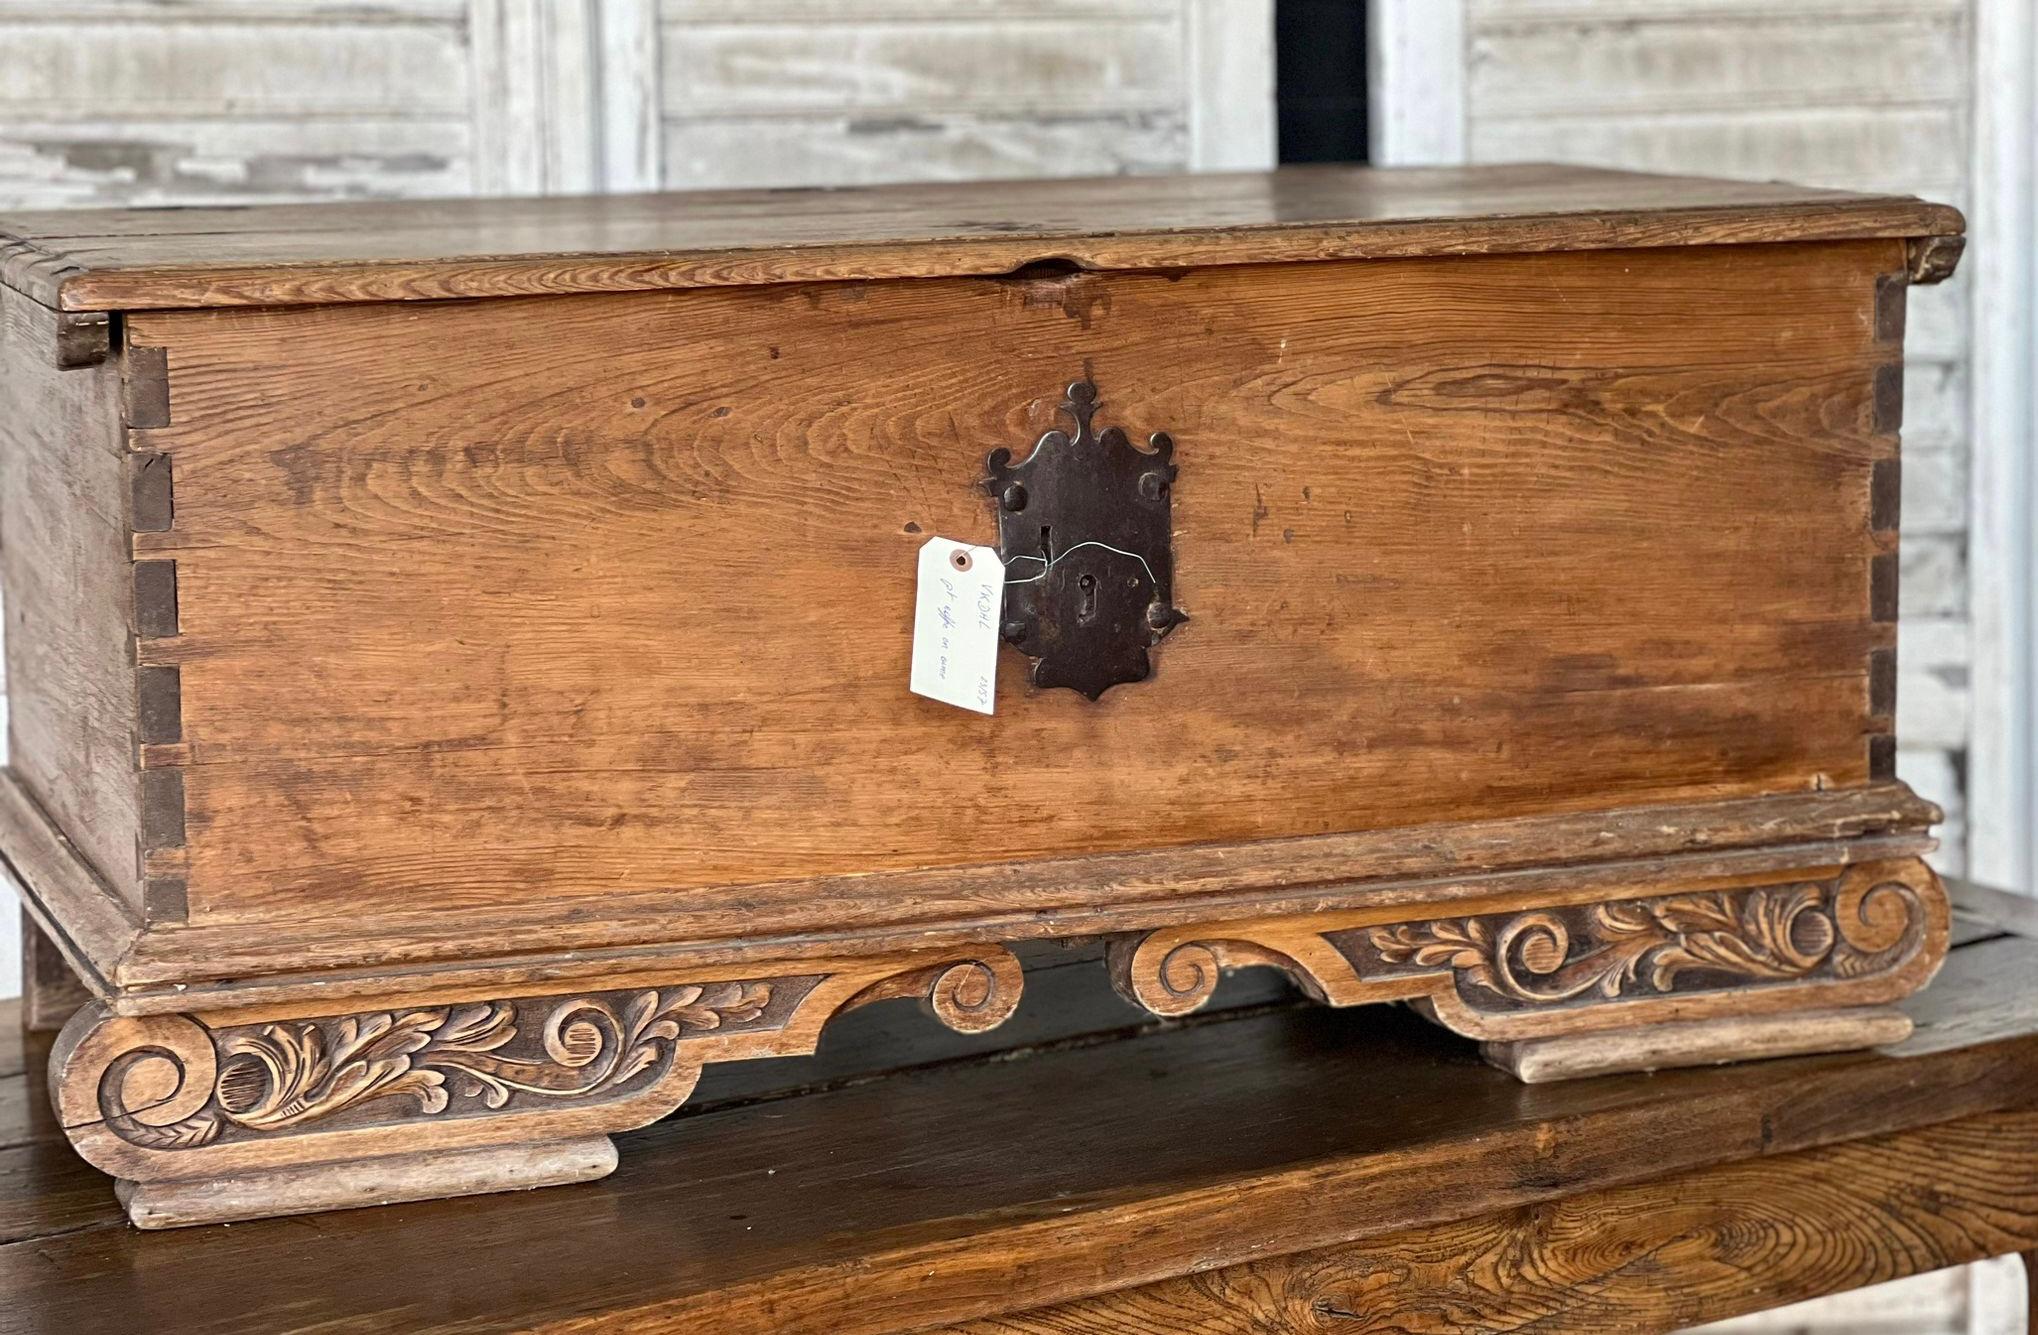 A lovely early 19th Century Truck, French in origin dating to the early 19th Century, lovely feet and hinges. Highly decorative and highly useful. In nice untouched original condition.
Measures: width 112 cm
depth 54 cm
height 51 cm